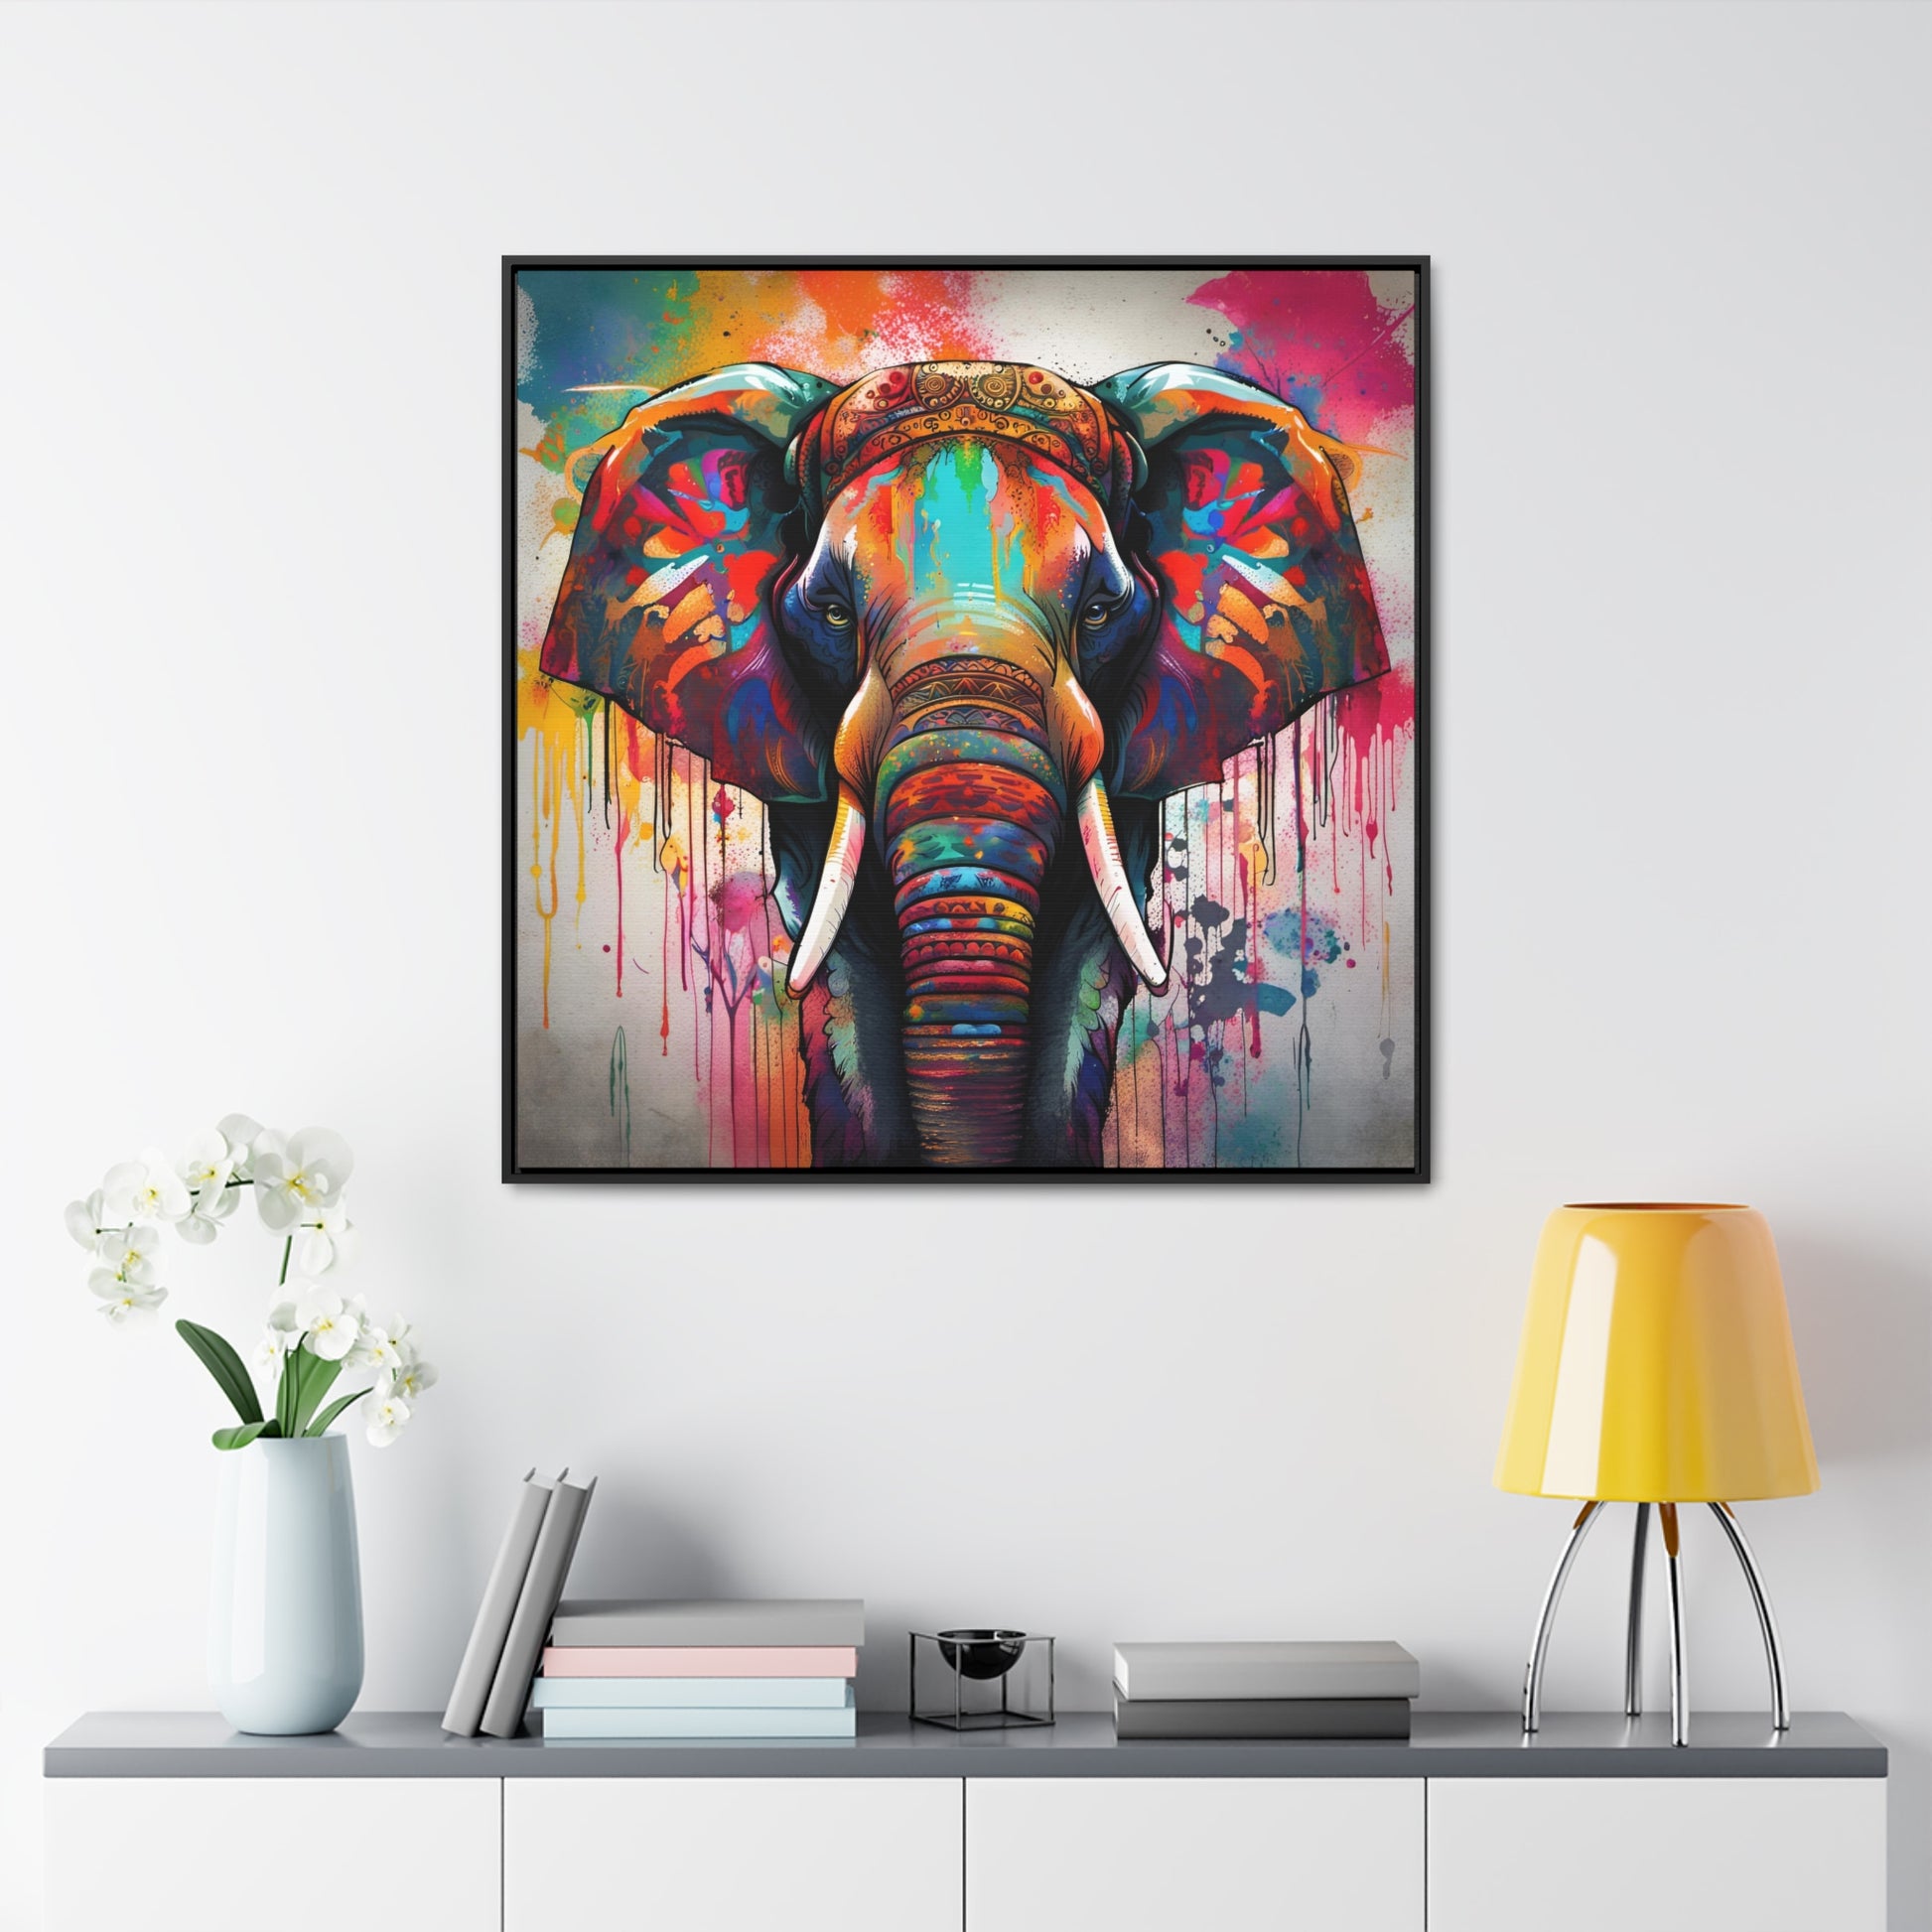 Dripping Colors Indian Elephant Print on Canvas in a Floating Frame 36x36